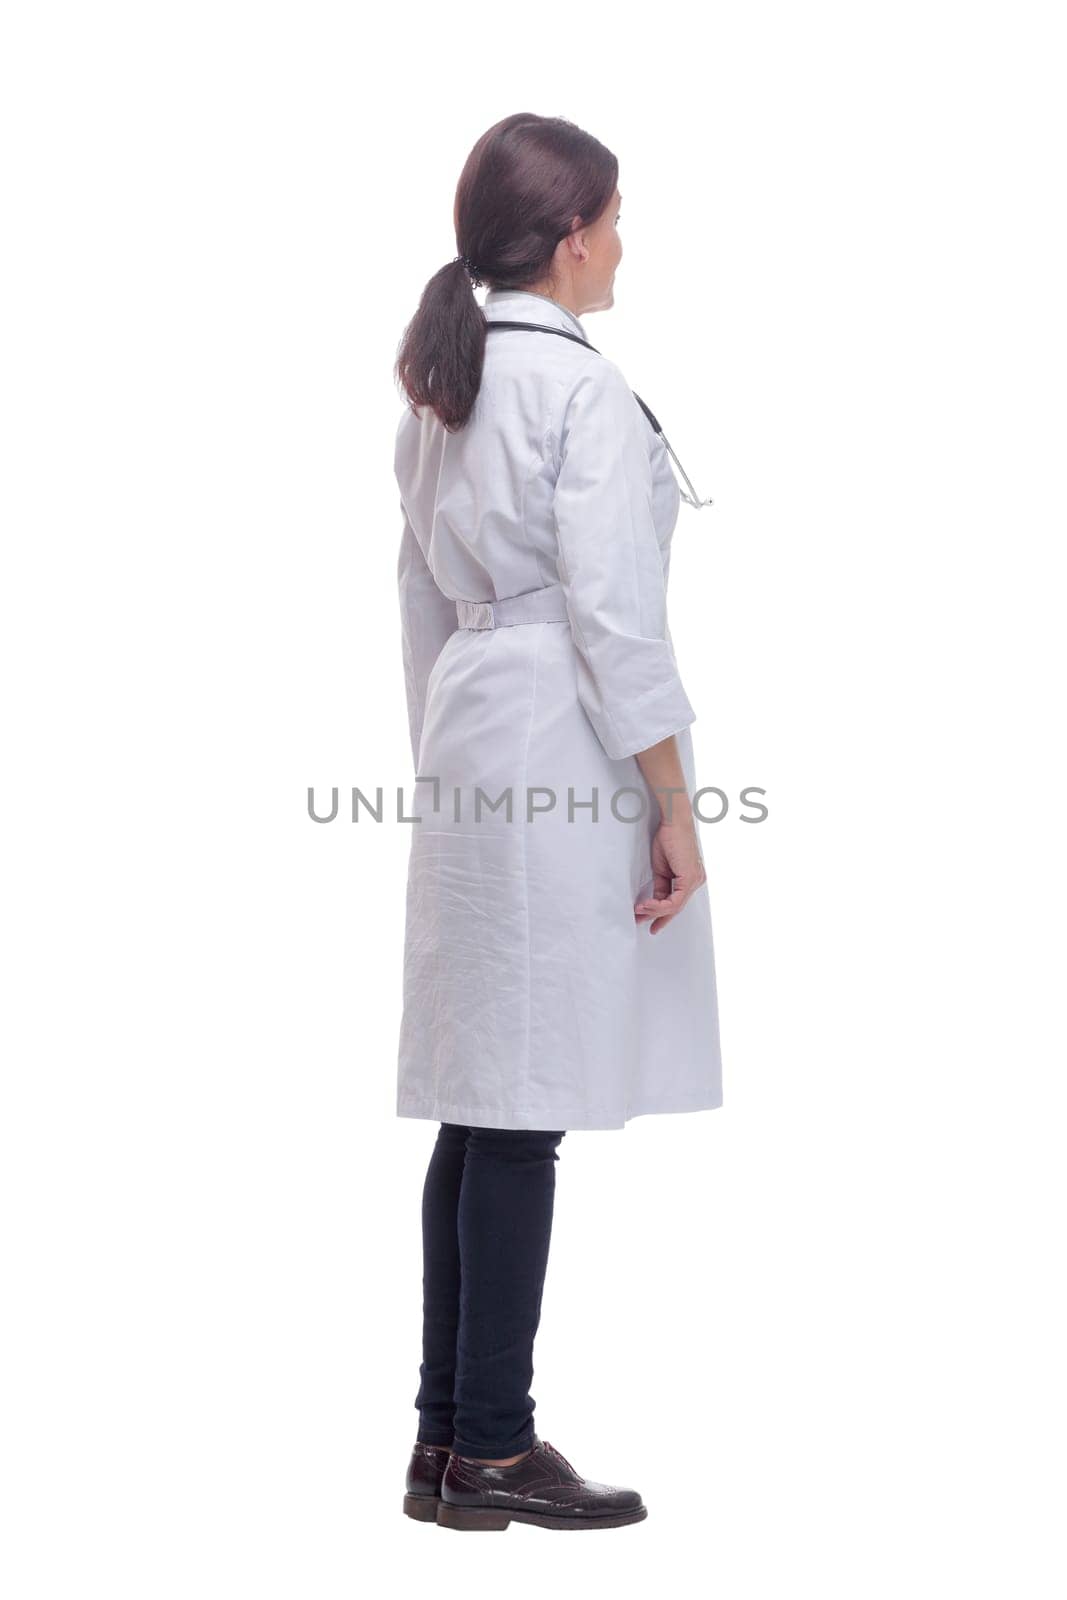 Female health care worker from the back - looking at something by asdf